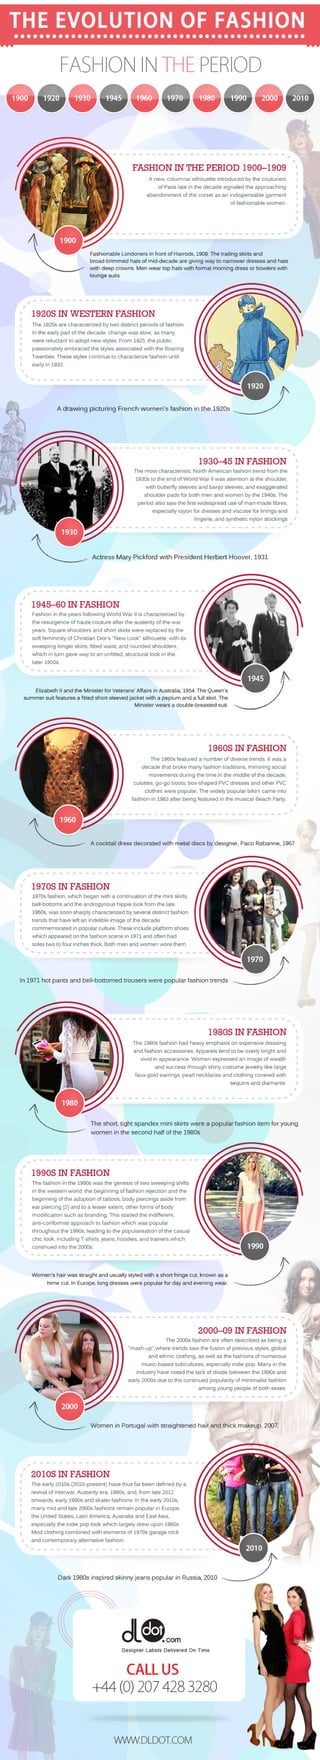 Fashion Trends Evolution- Info-graphics by Dldot